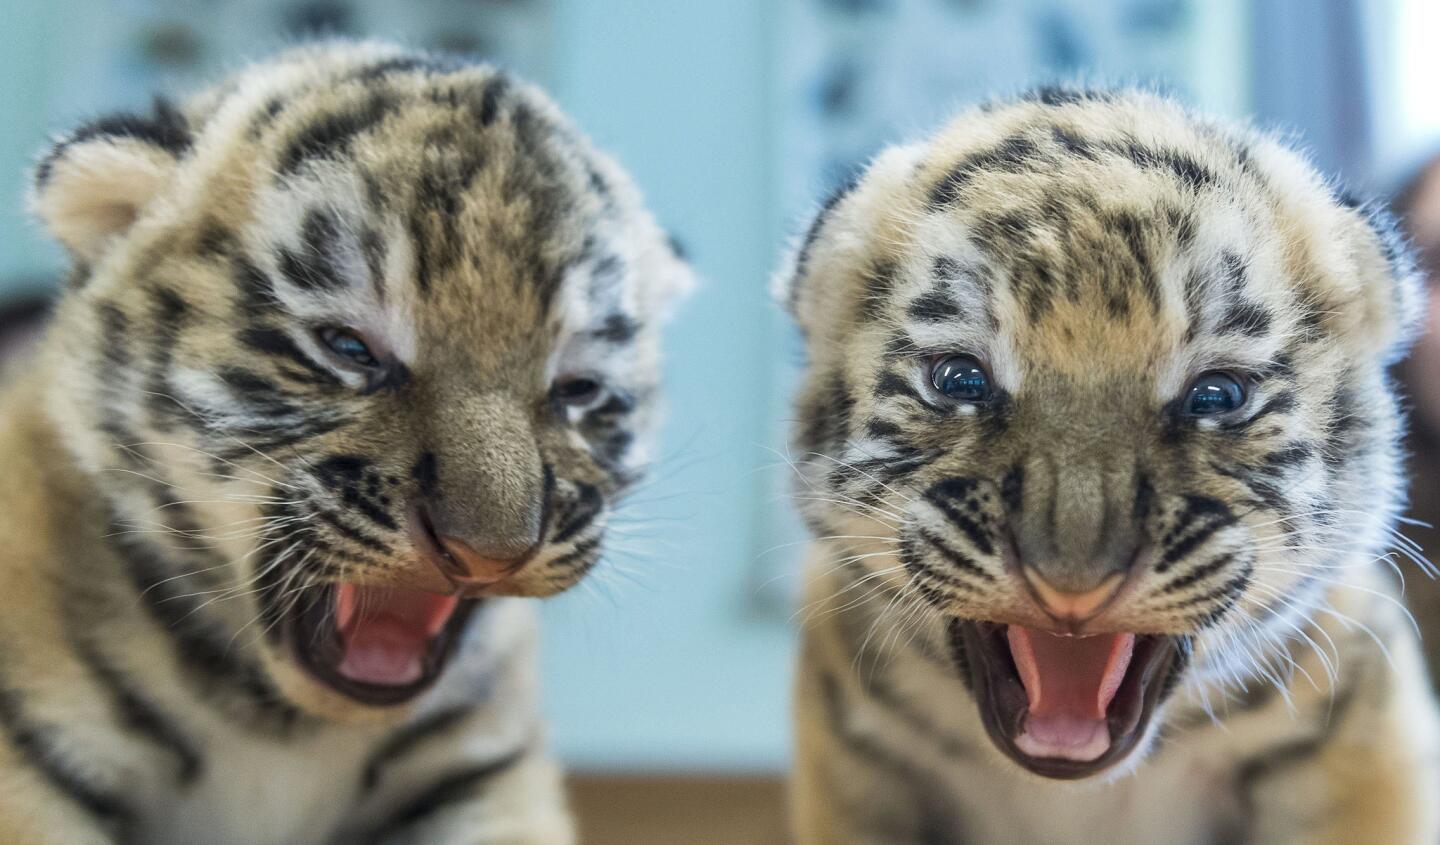 Two Siberian tiger cubs snarl on an examination table during a routine medical check in Veszprem Zoo in Veszprem, Hungary, on June 15, 2016. The cubs were born at the zoo two weeks earlier.